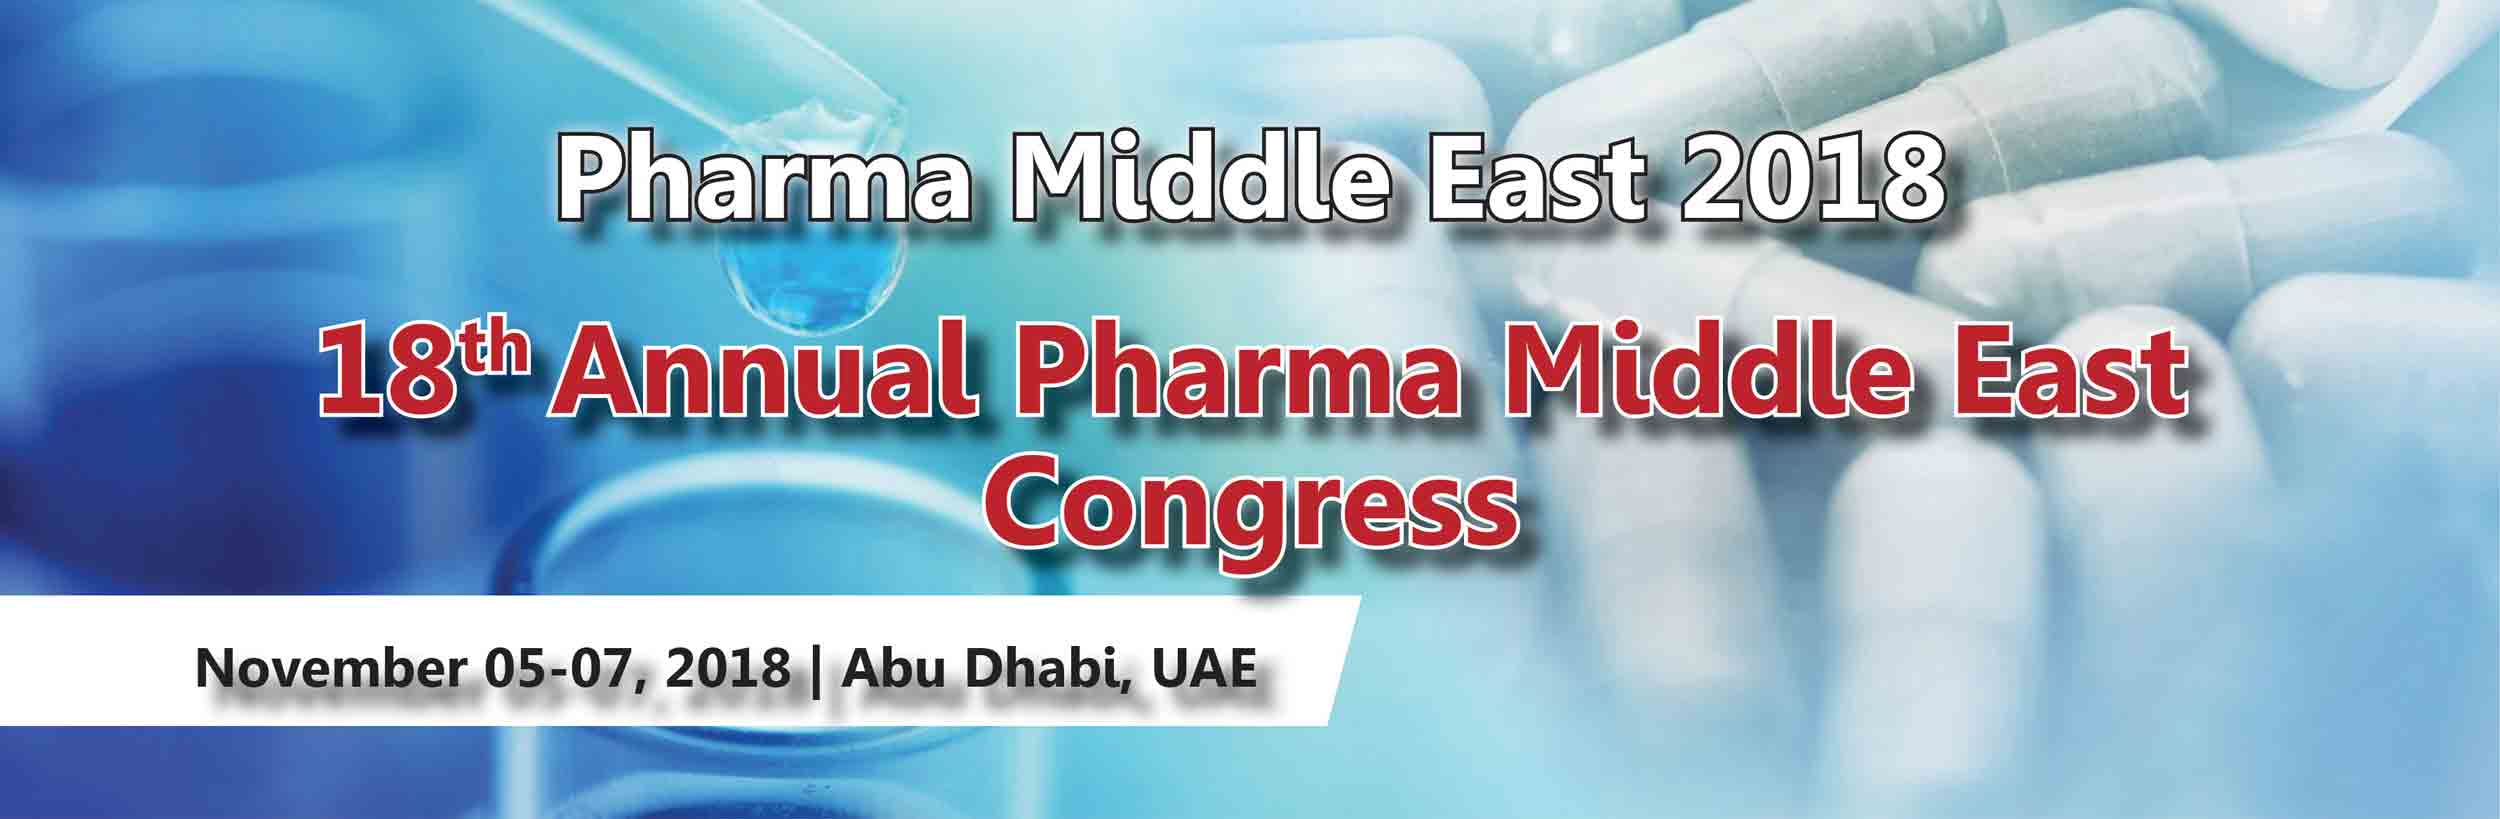 Photos of18th Annual Pharma Middle East Congress